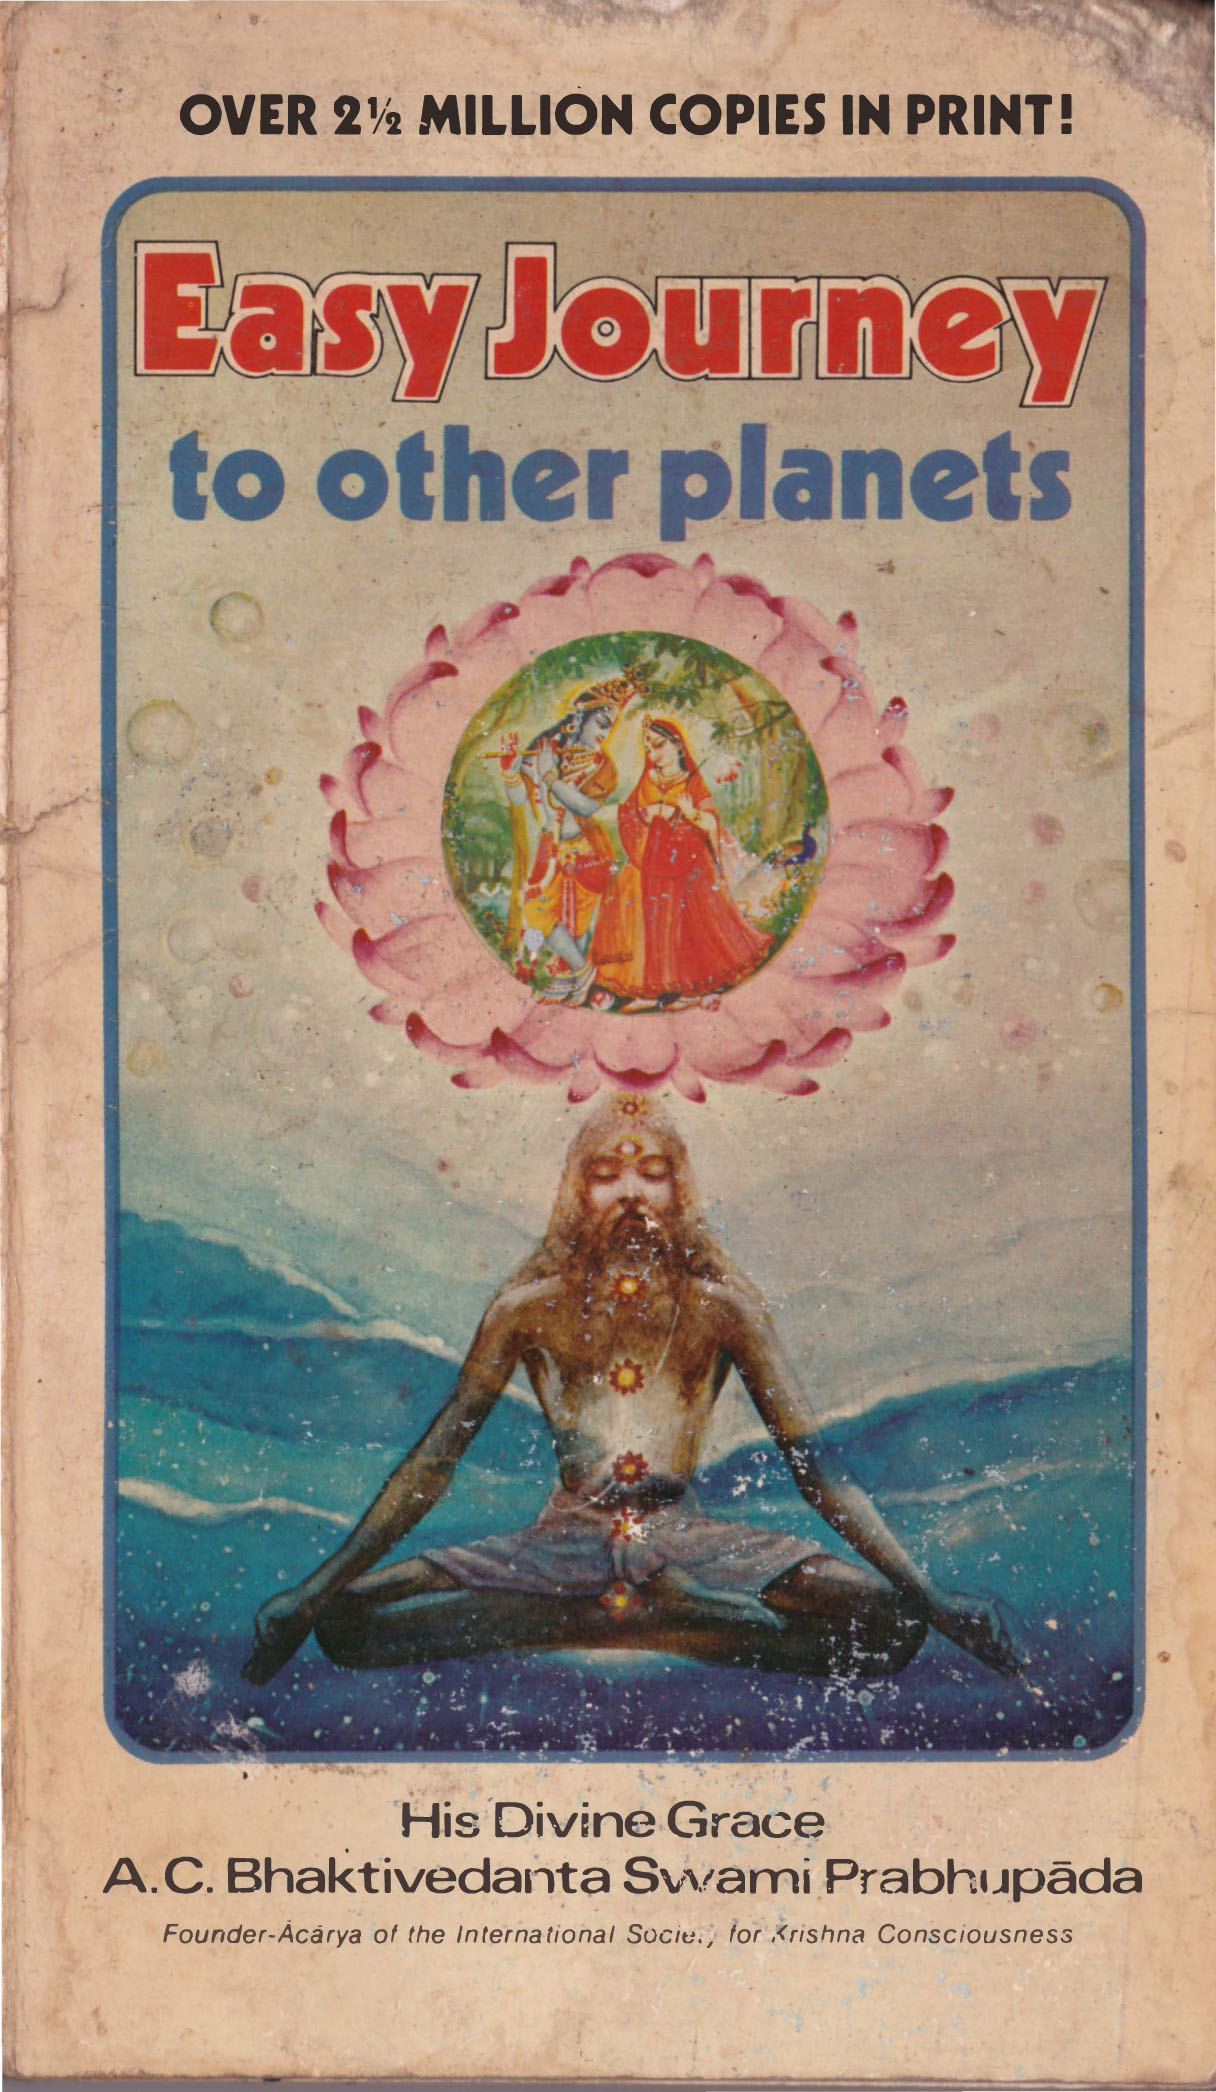 Easy-Journy-to-Other-Planets-1977-Scanned-edition-1.jpg